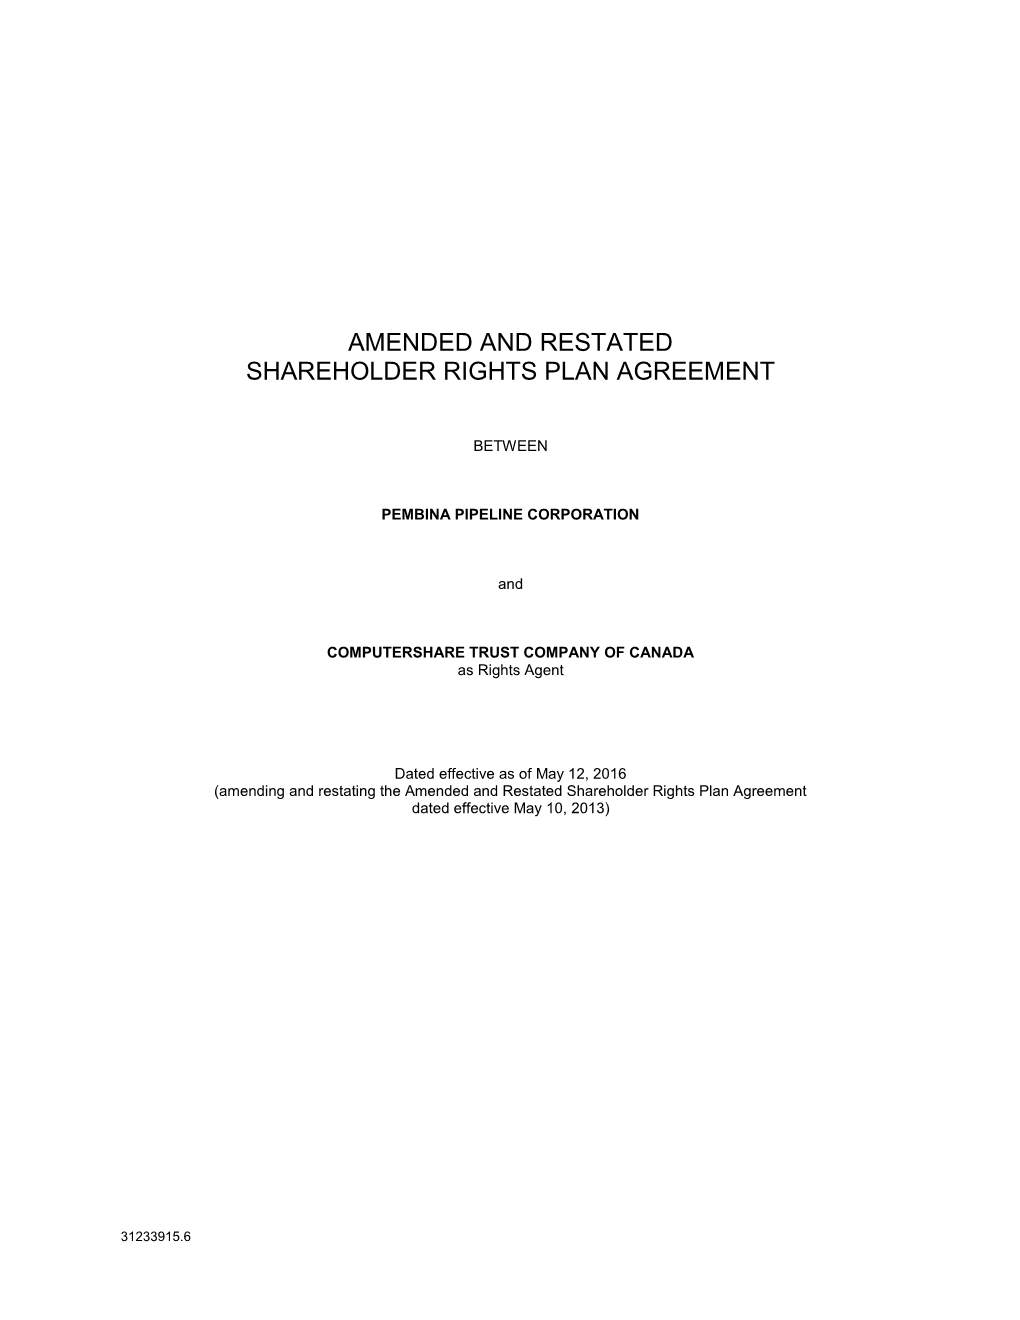 Amended and Restated Shareholder Rights Plan Agreement